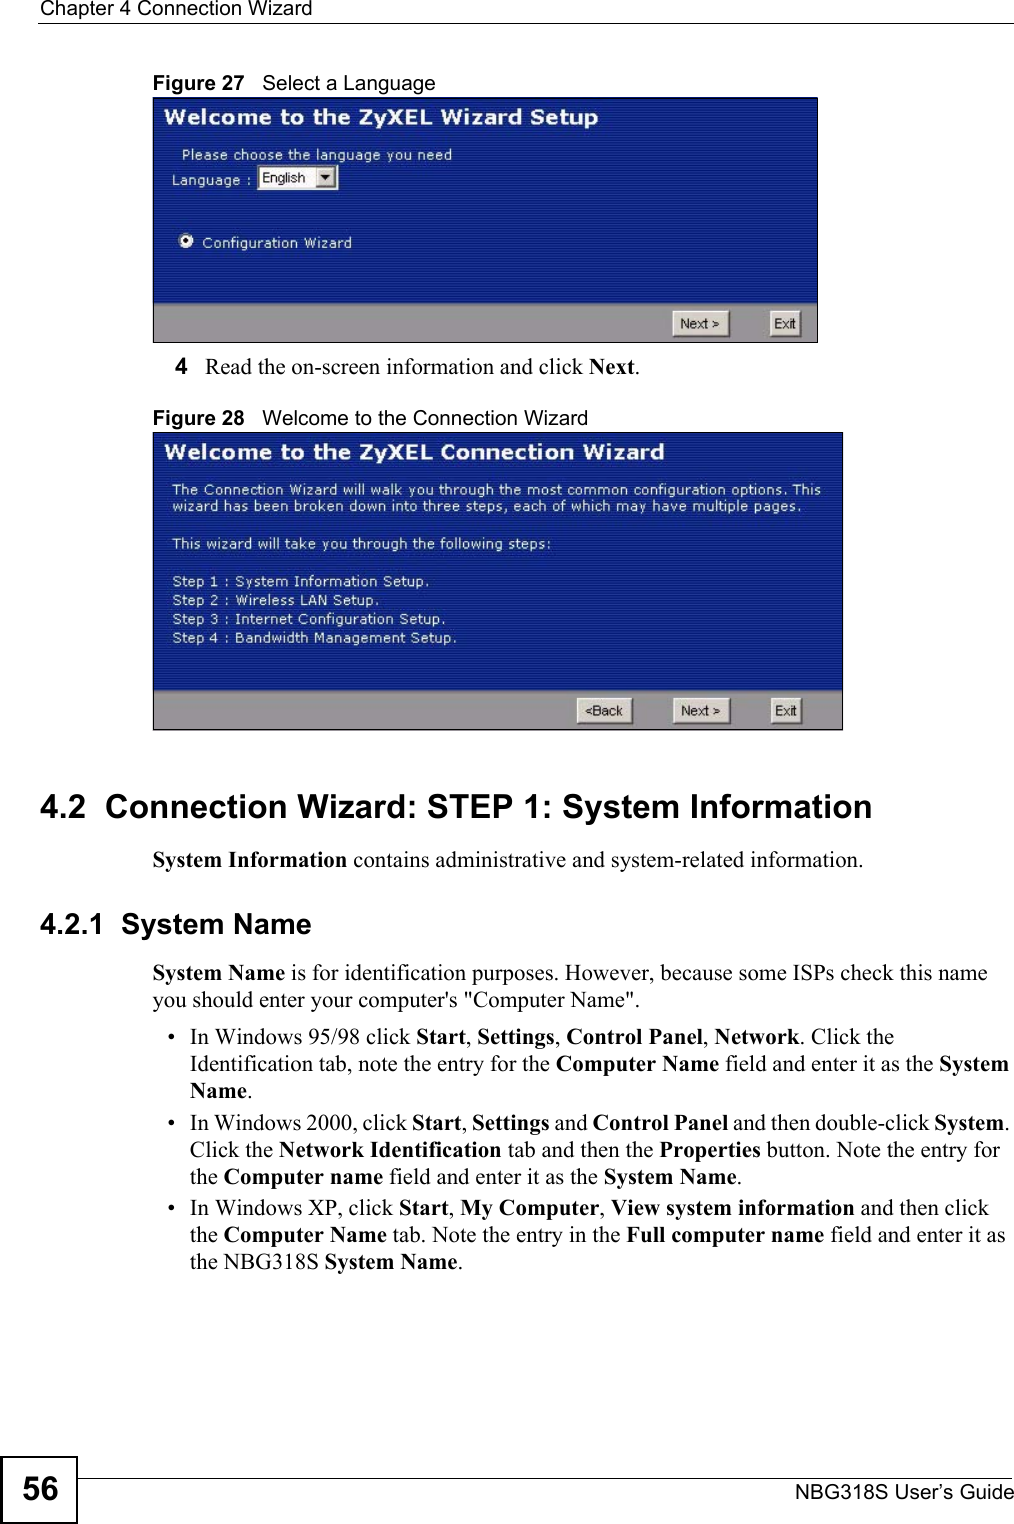 Chapter 4 Connection WizardNBG318S User’s Guide56Figure 27   Select a Language4Read the on-screen information and click Next.Figure 28   Welcome to the Connection Wizard4.2  Connection Wizard: STEP 1: System InformationSystem Information contains administrative and system-related information.4.2.1  System NameSystem Name is for identification purposes. However, because some ISPs check this name you should enter your computer&apos;s &quot;Computer Name&quot;. • In Windows 95/98 click Start, Settings, Control Panel, Network. Click the Identification tab, note the entry for the Computer Name field and enter it as the System Name.• In Windows 2000, click Start, Settings and Control Panel and then double-click System. Click the Network Identification tab and then the Properties button. Note the entry for the Computer name field and enter it as the System Name.• In Windows XP, click Start, My Computer, View system information and then click the Computer Name tab. Note the entry in the Full computer name field and enter it as the NBG318S System Name.